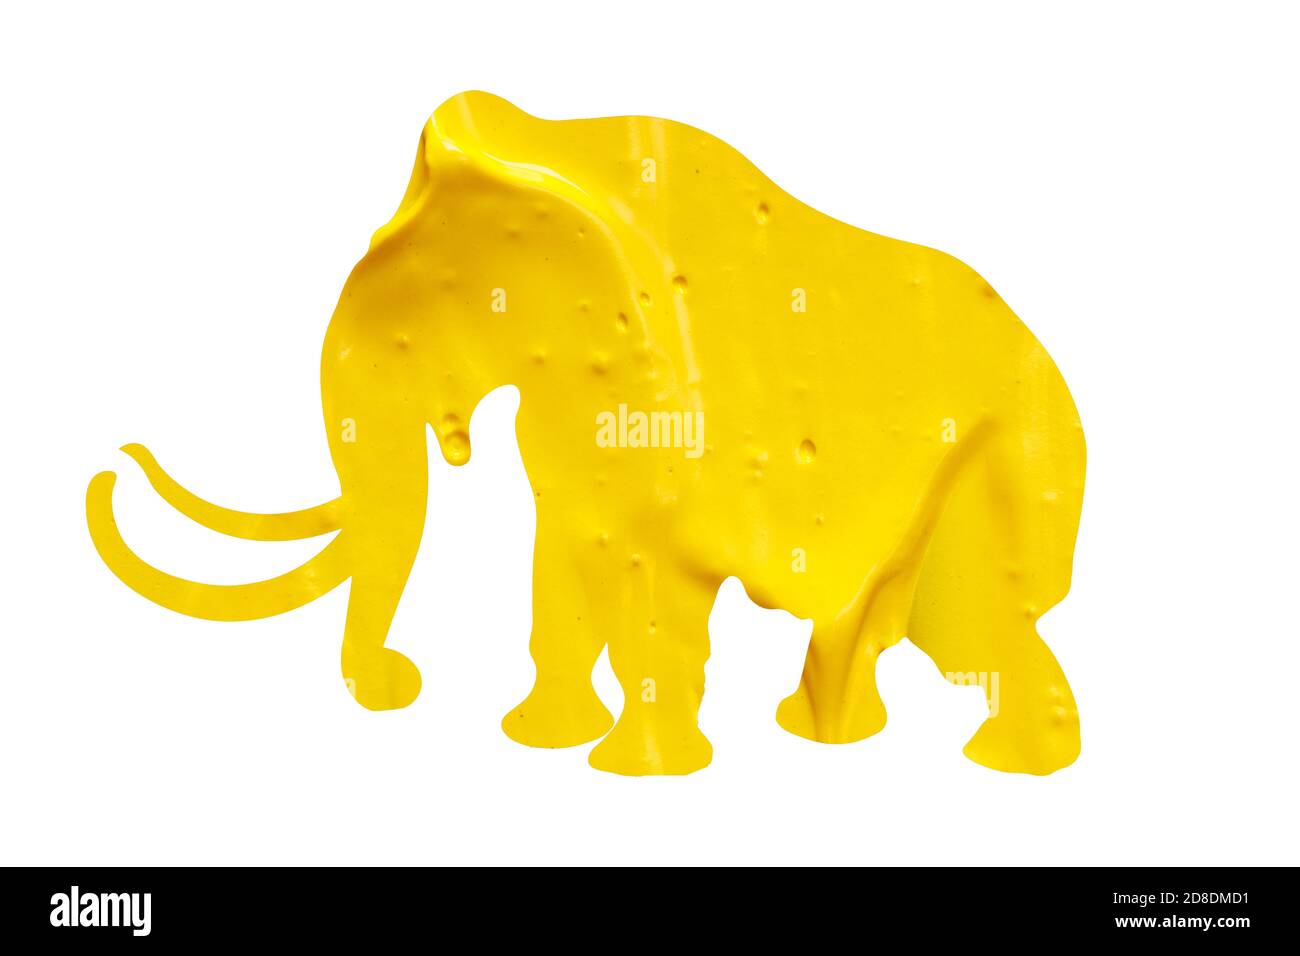 elephant silhouette with color paint texture isolated on white background Stock Photo